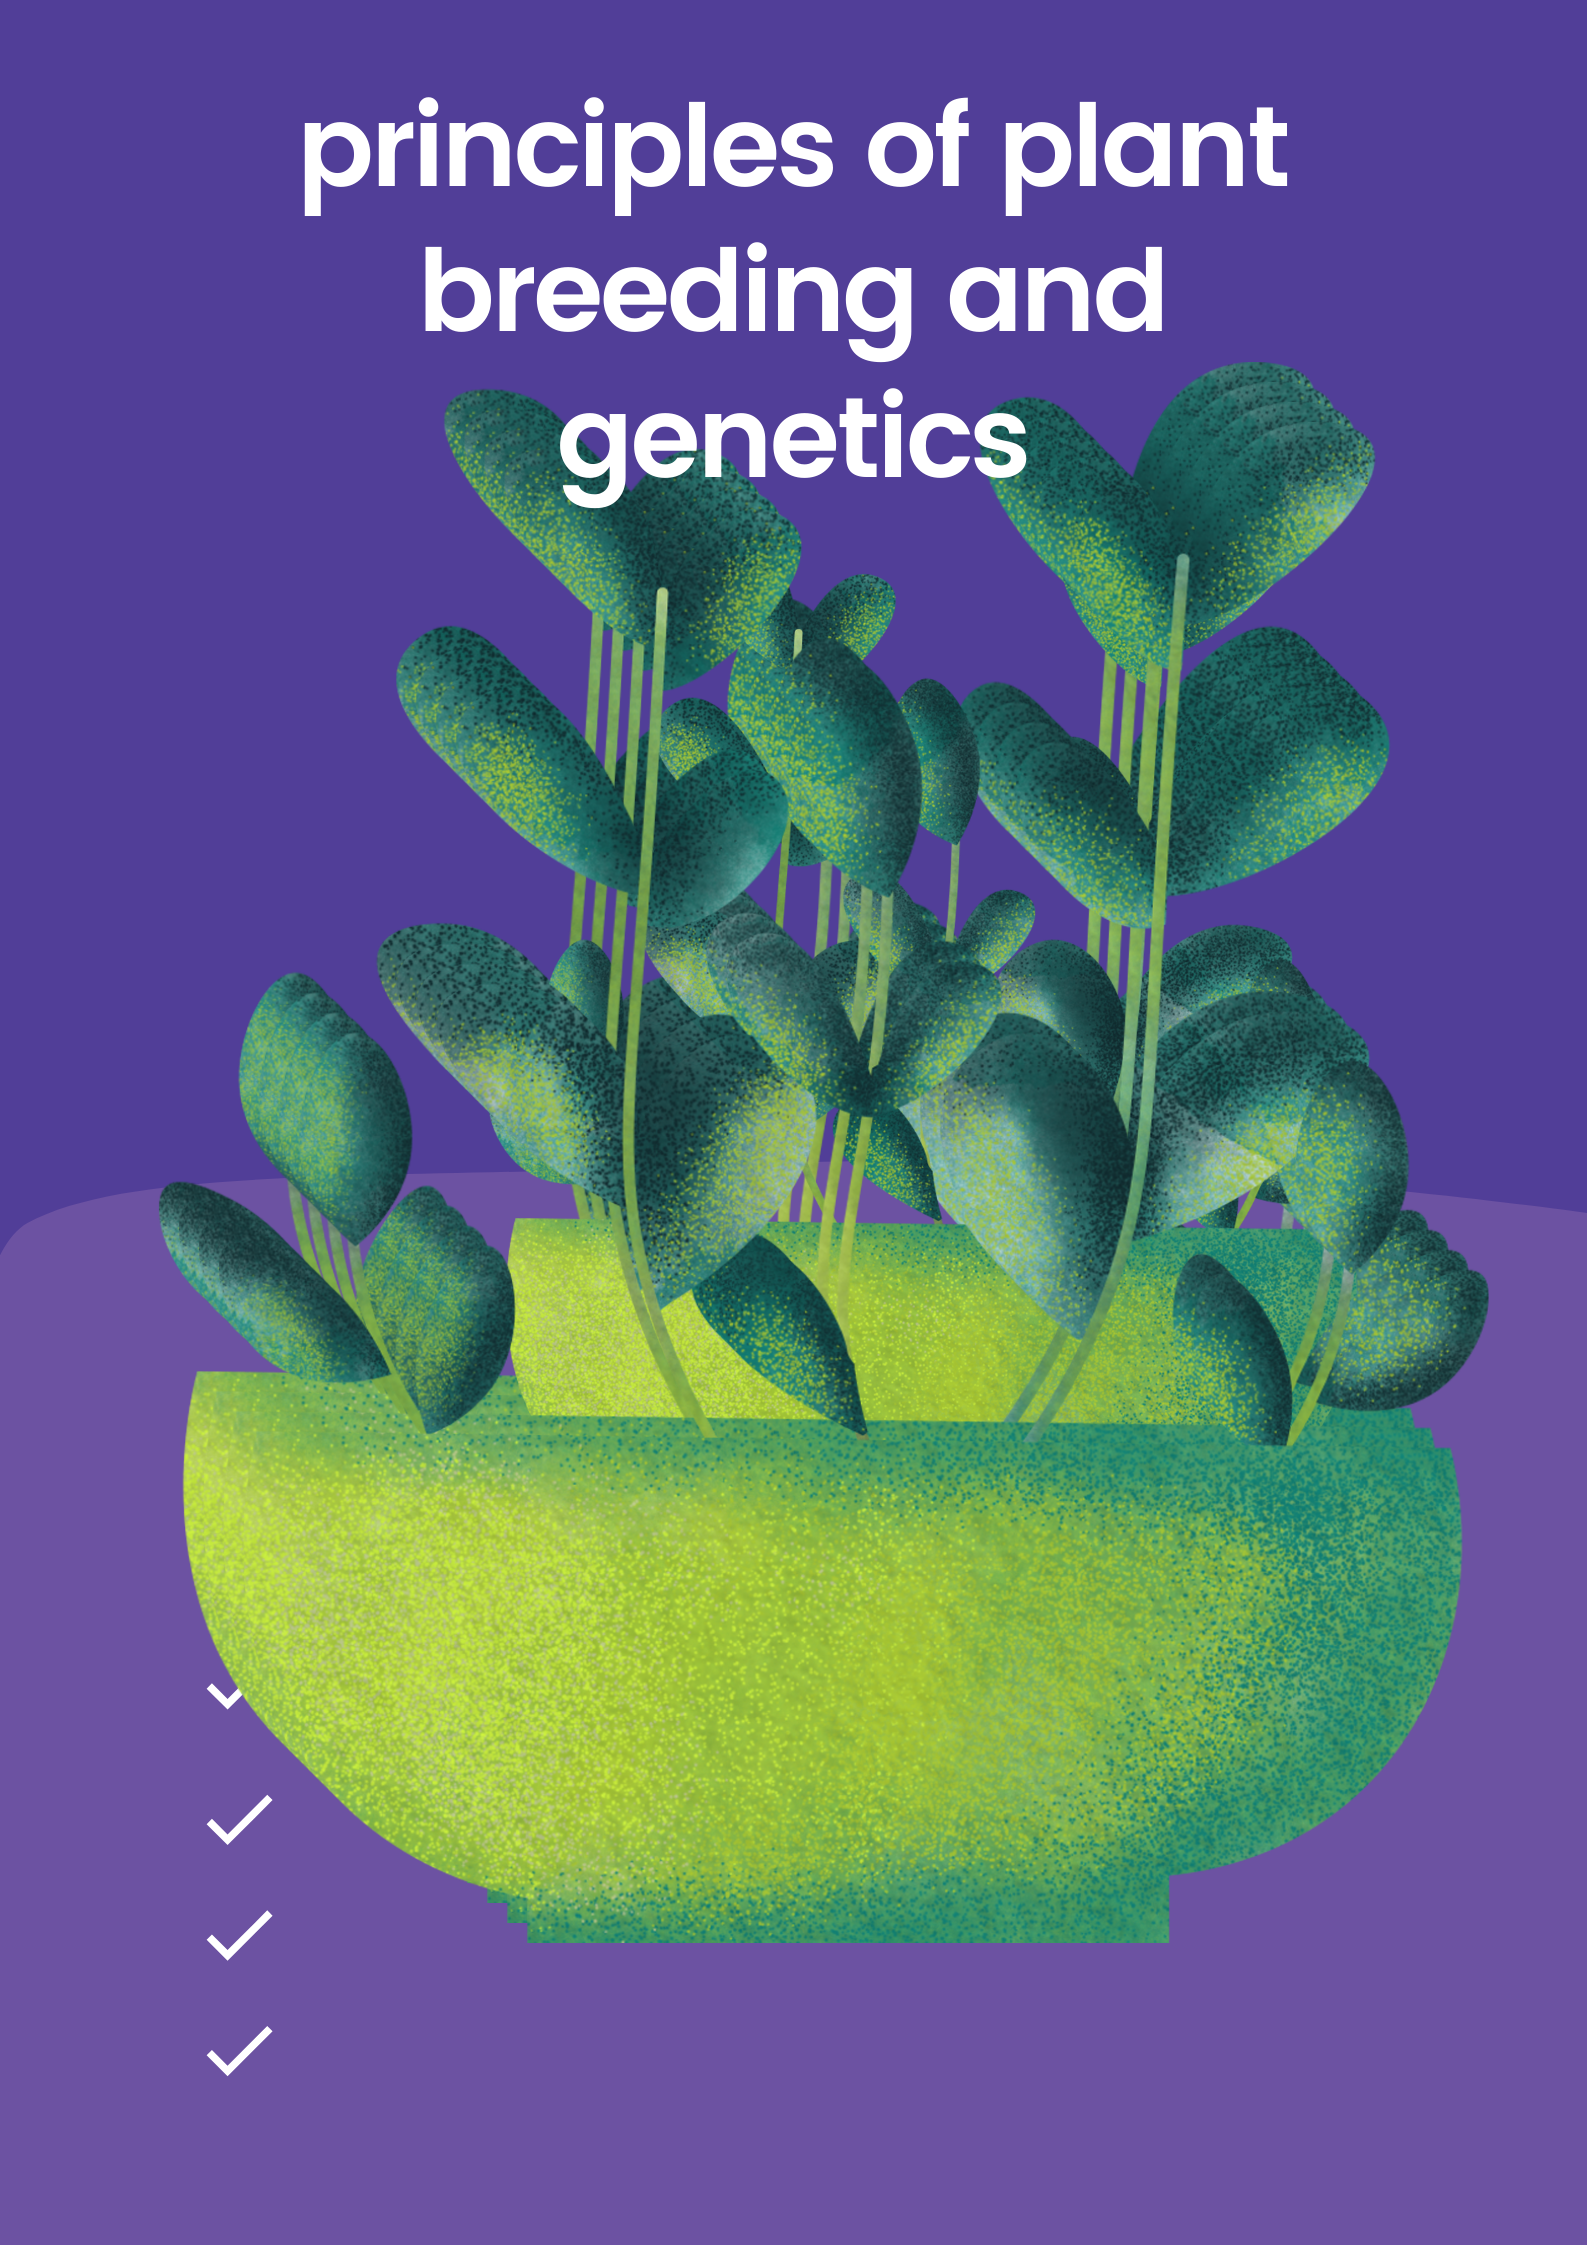  principles of plant breeding and genetics Seed from chosen half-sibs, which have been pollinated by irregular dust from the populace (implying that solitary the female parent is known and chosen, thus the expression "half-sib") is developed in replicated offspring lines with the end goal of choice